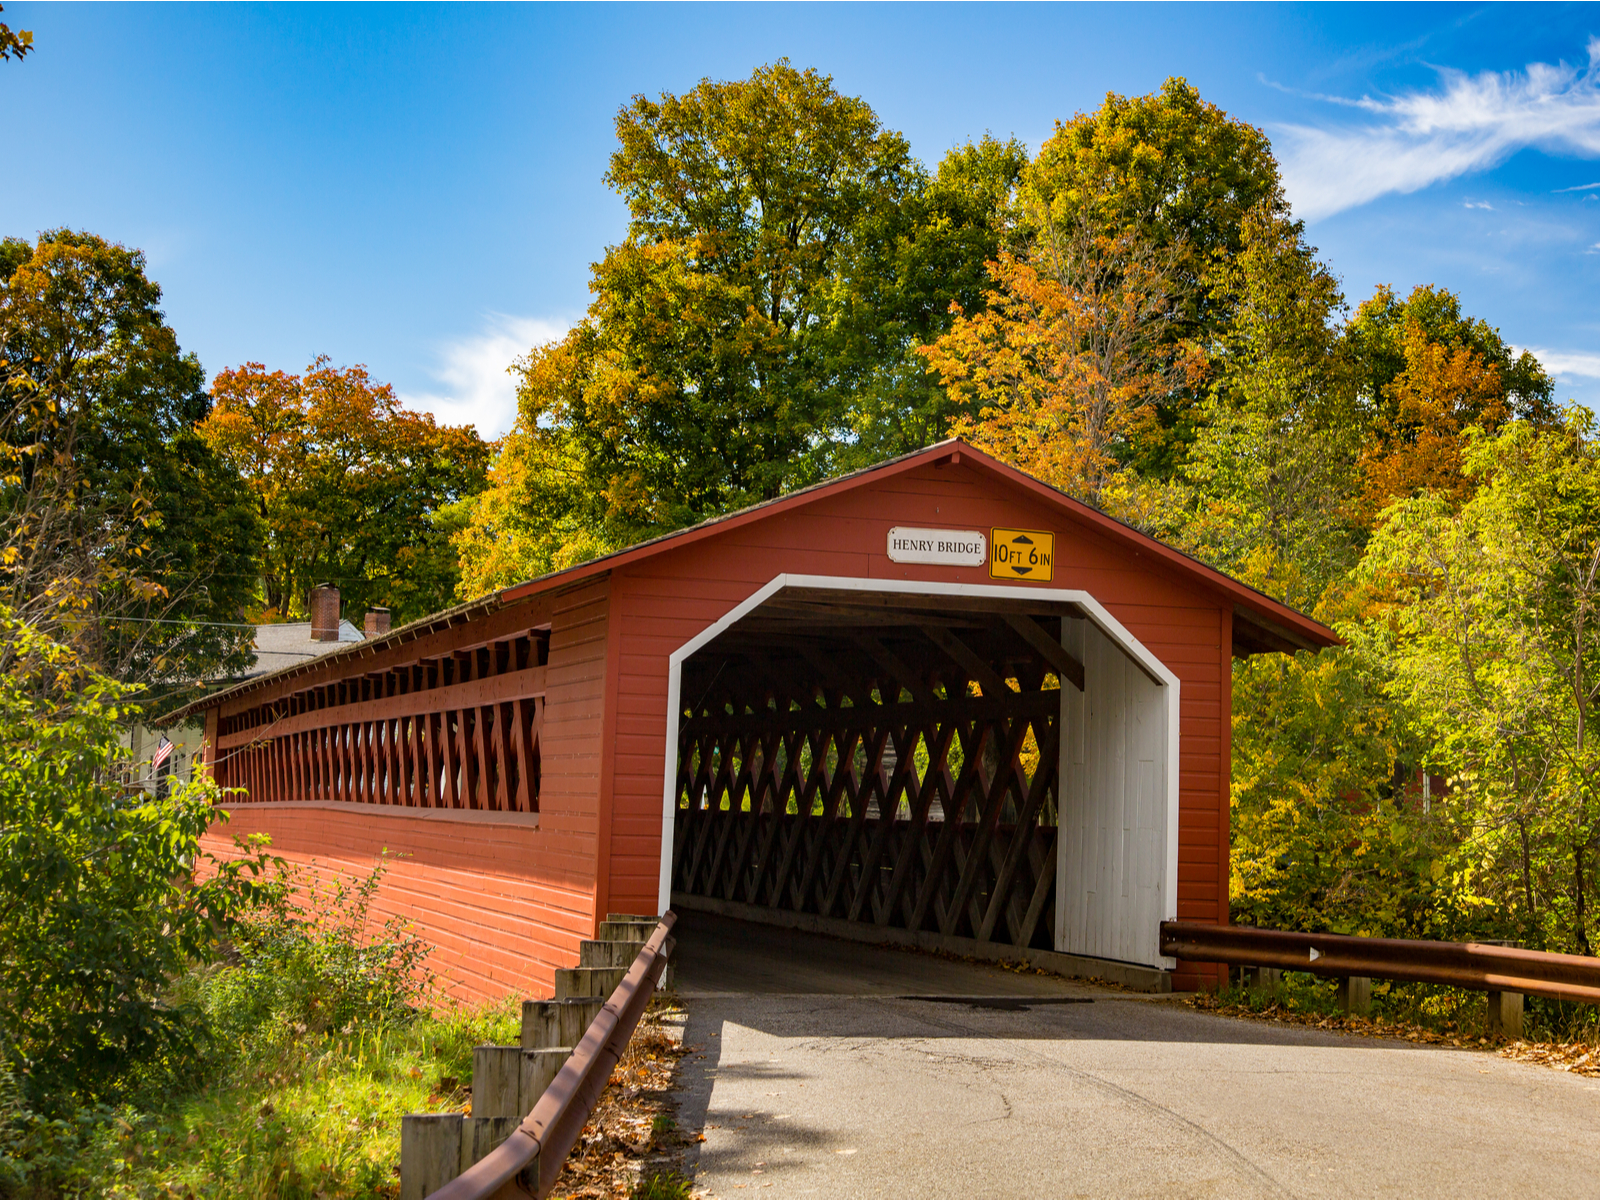 Neat view of The Henry covered bridge over the Walloomsac river near Bennington, Vermont